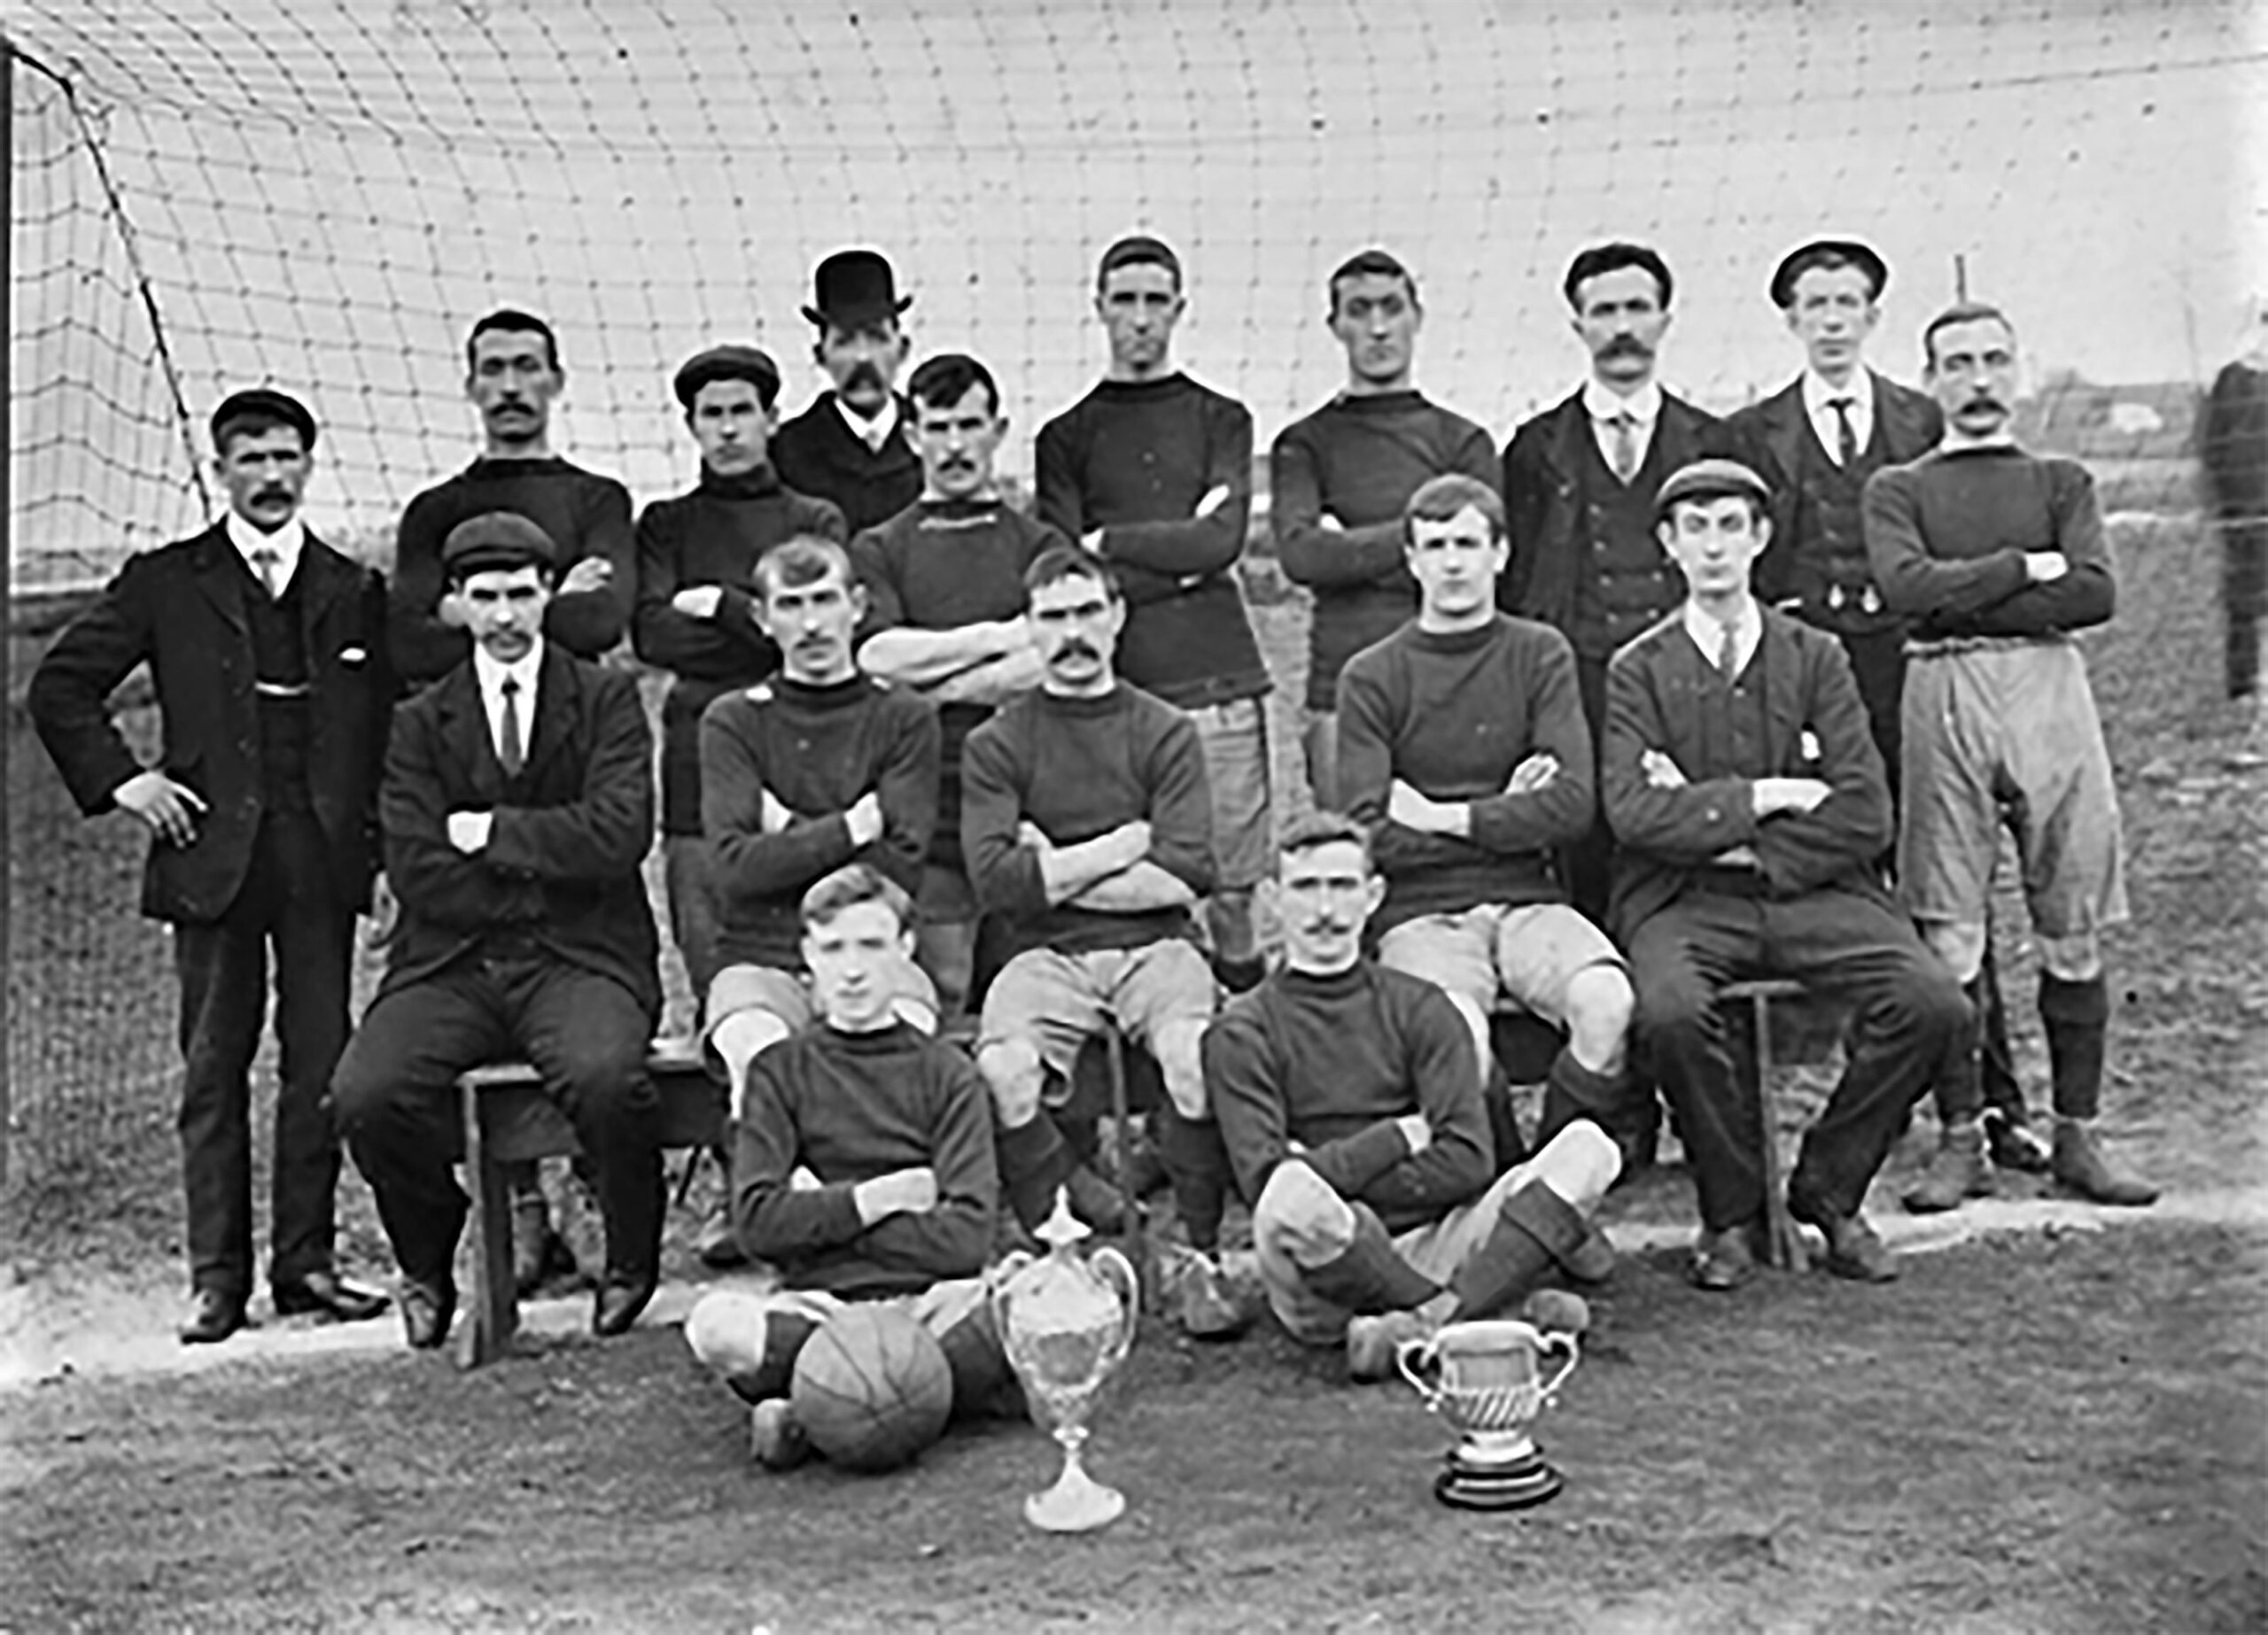 Tayport Heritage Trail - Board 16 - Montrave Cup(East Fife Cup) winning team & committee 1905